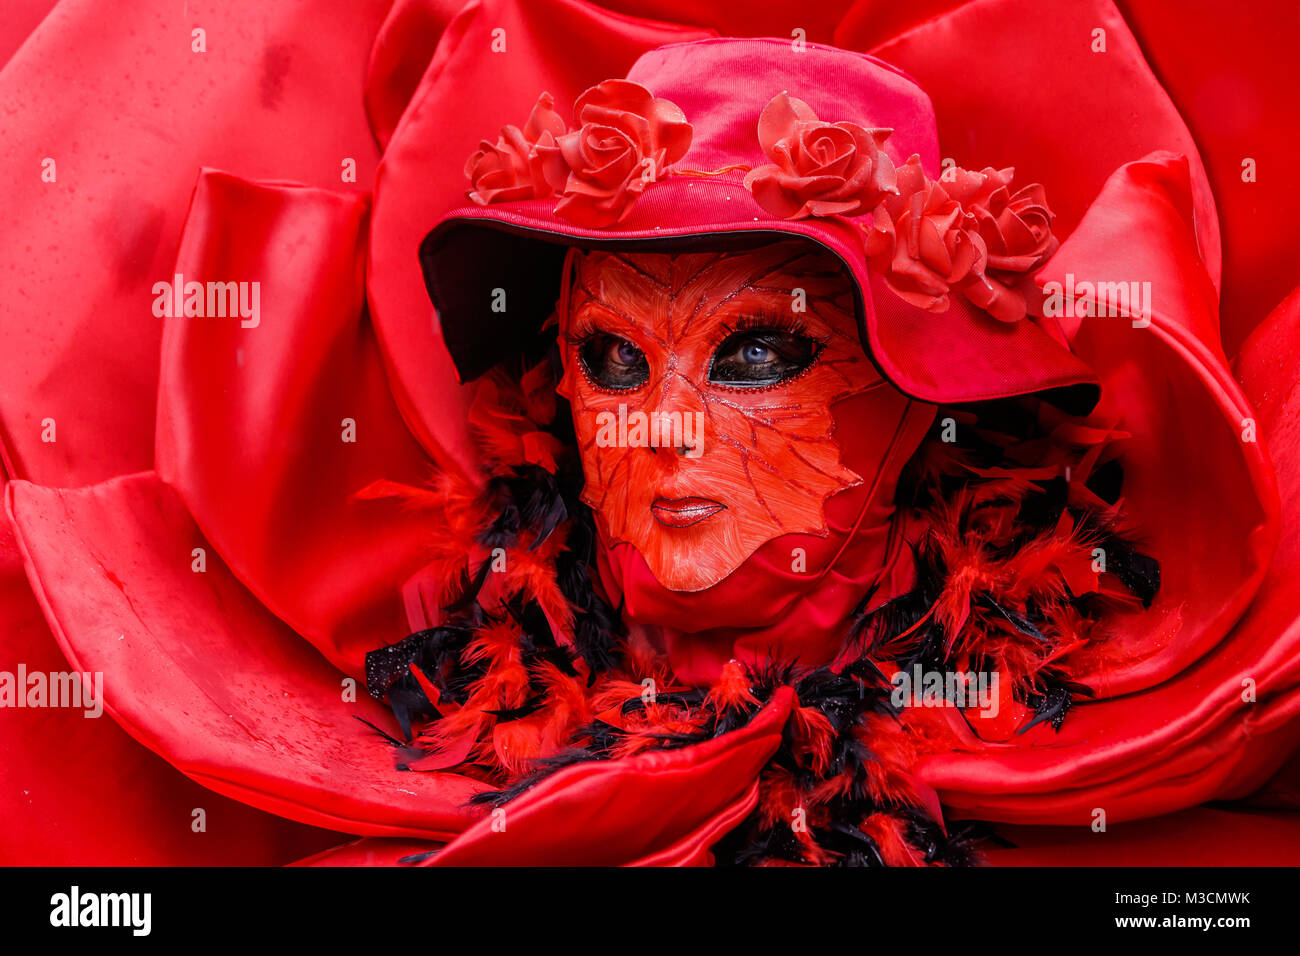 Schwäbisch Hall, Germany - February 4, 2018: Portrait of an unidentified participant dressed up in venetian style renaissance costume and mask at the  Stock Photo